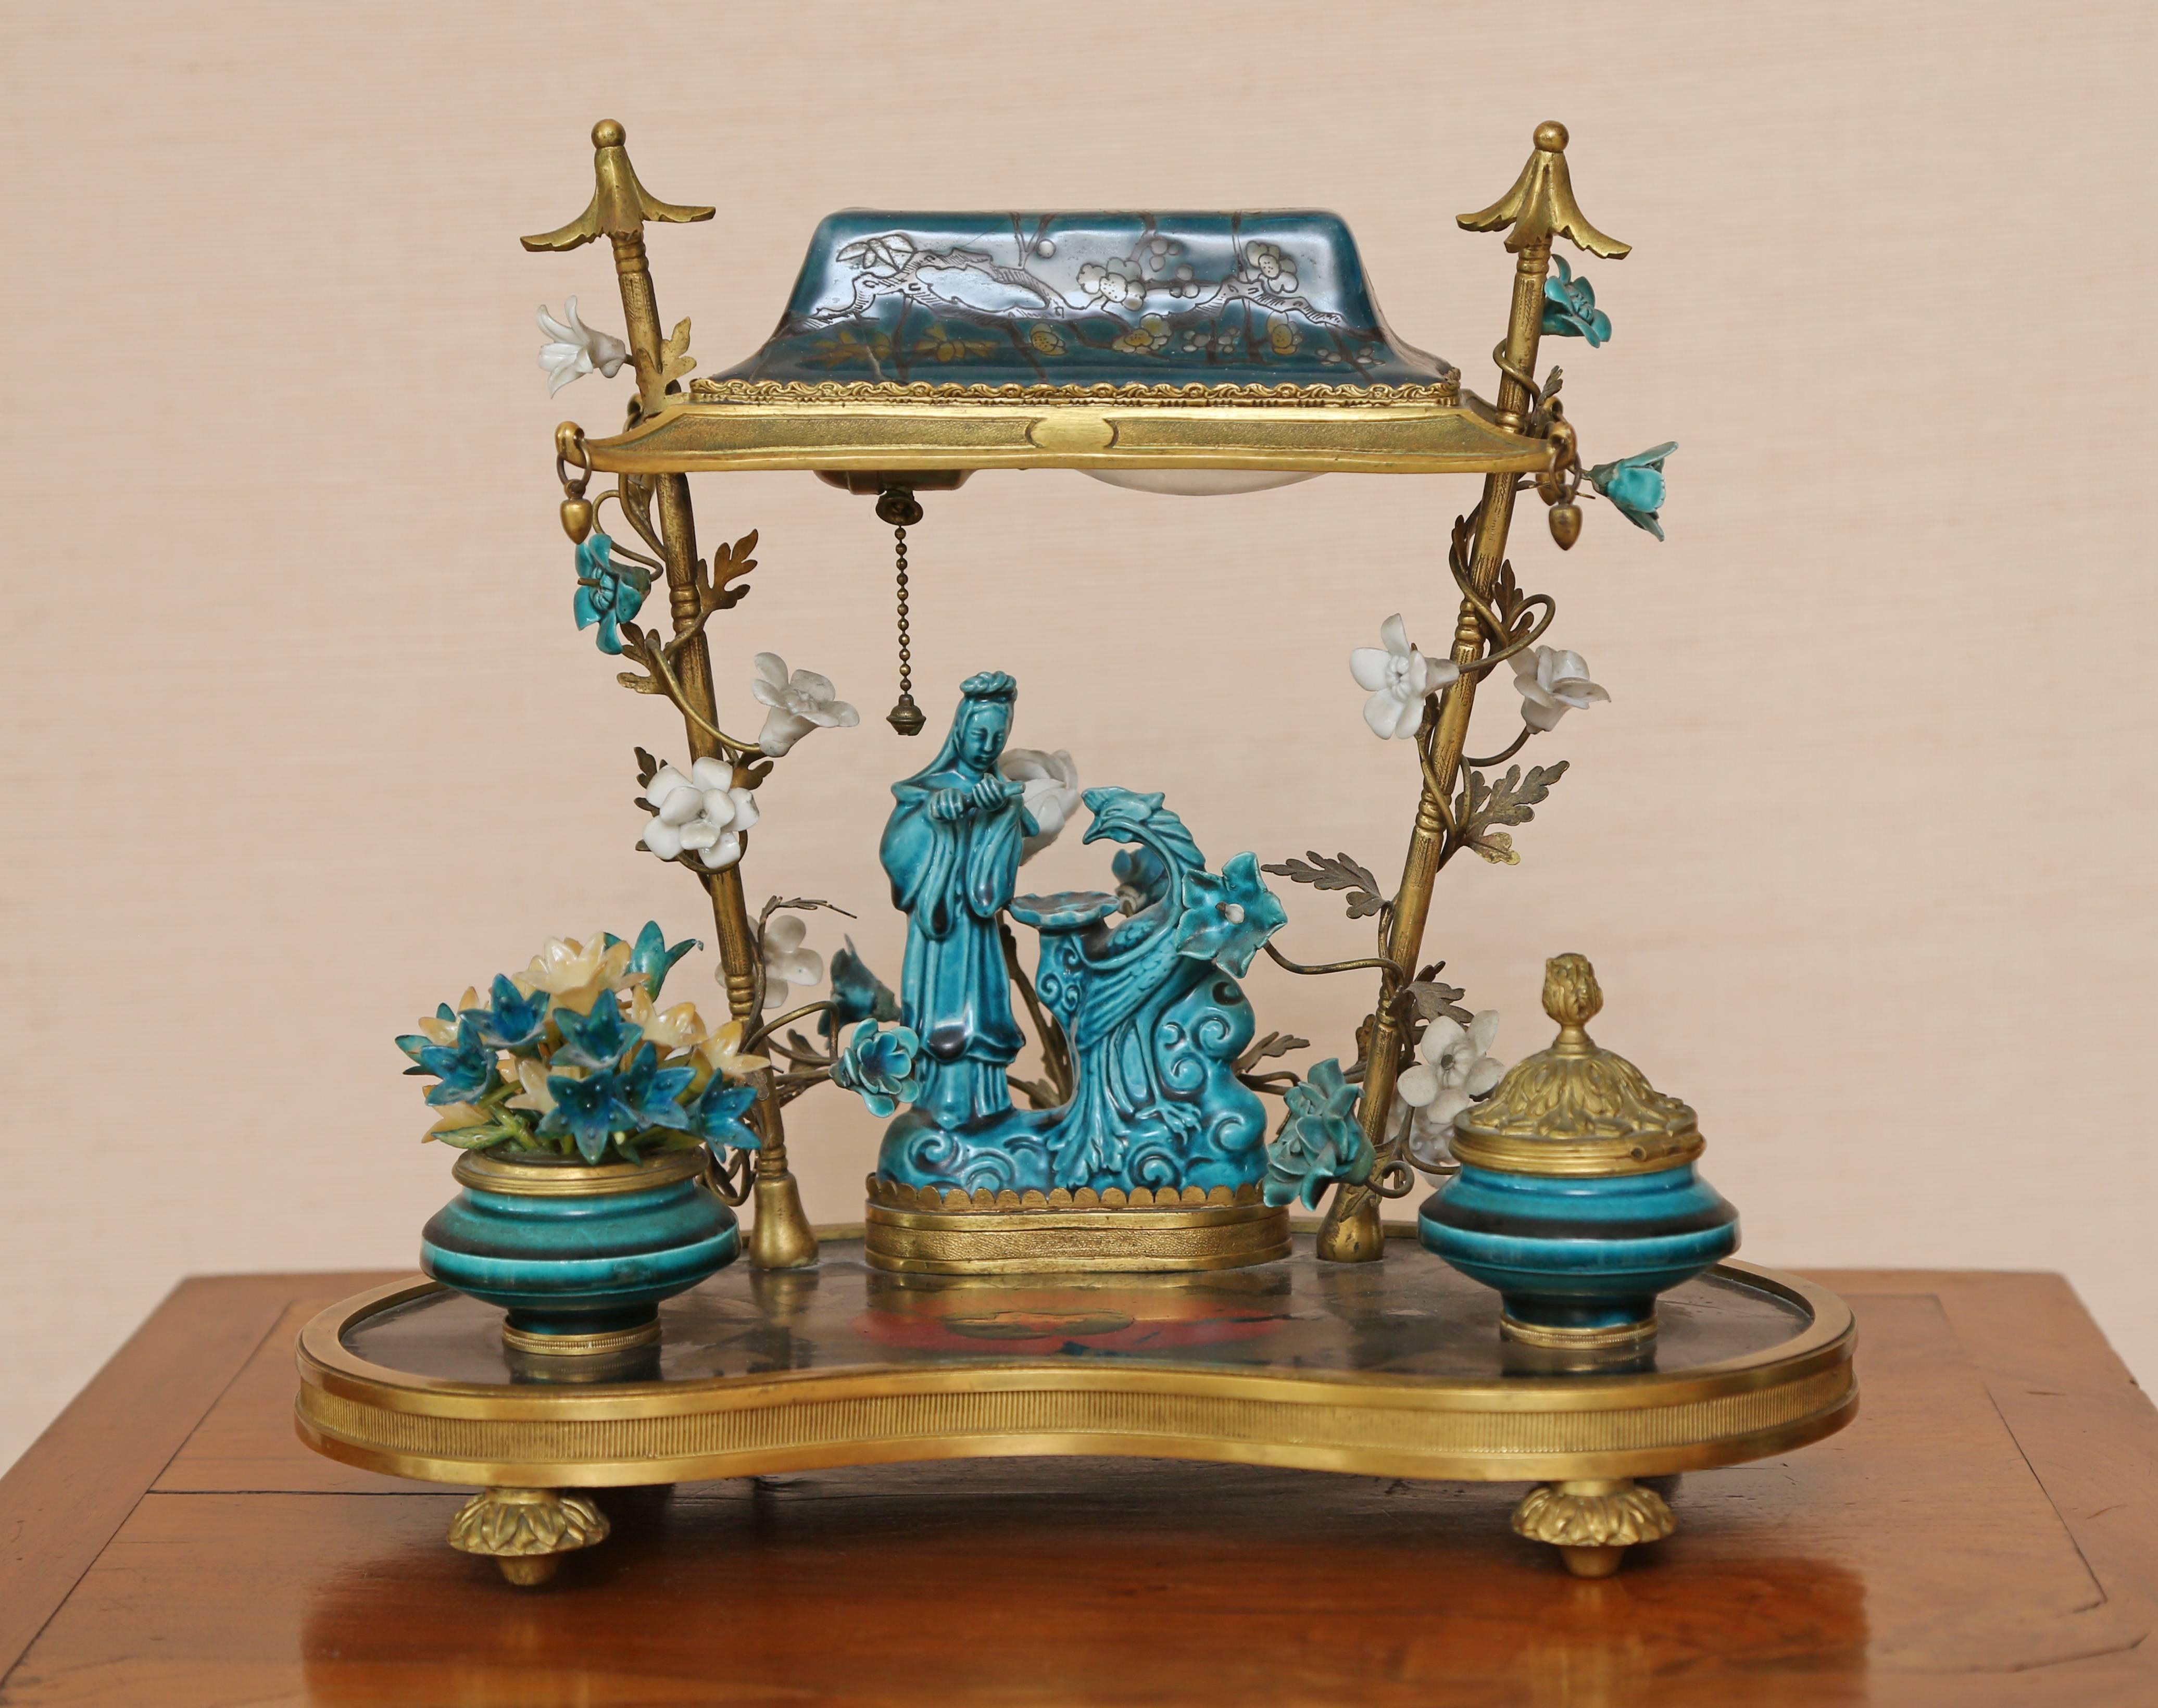 The underside of the cherry-blossom decorated palanquin forming the shade over the court figure with phoenix resting on the gilt-bronze mounted carton Pierre panel.